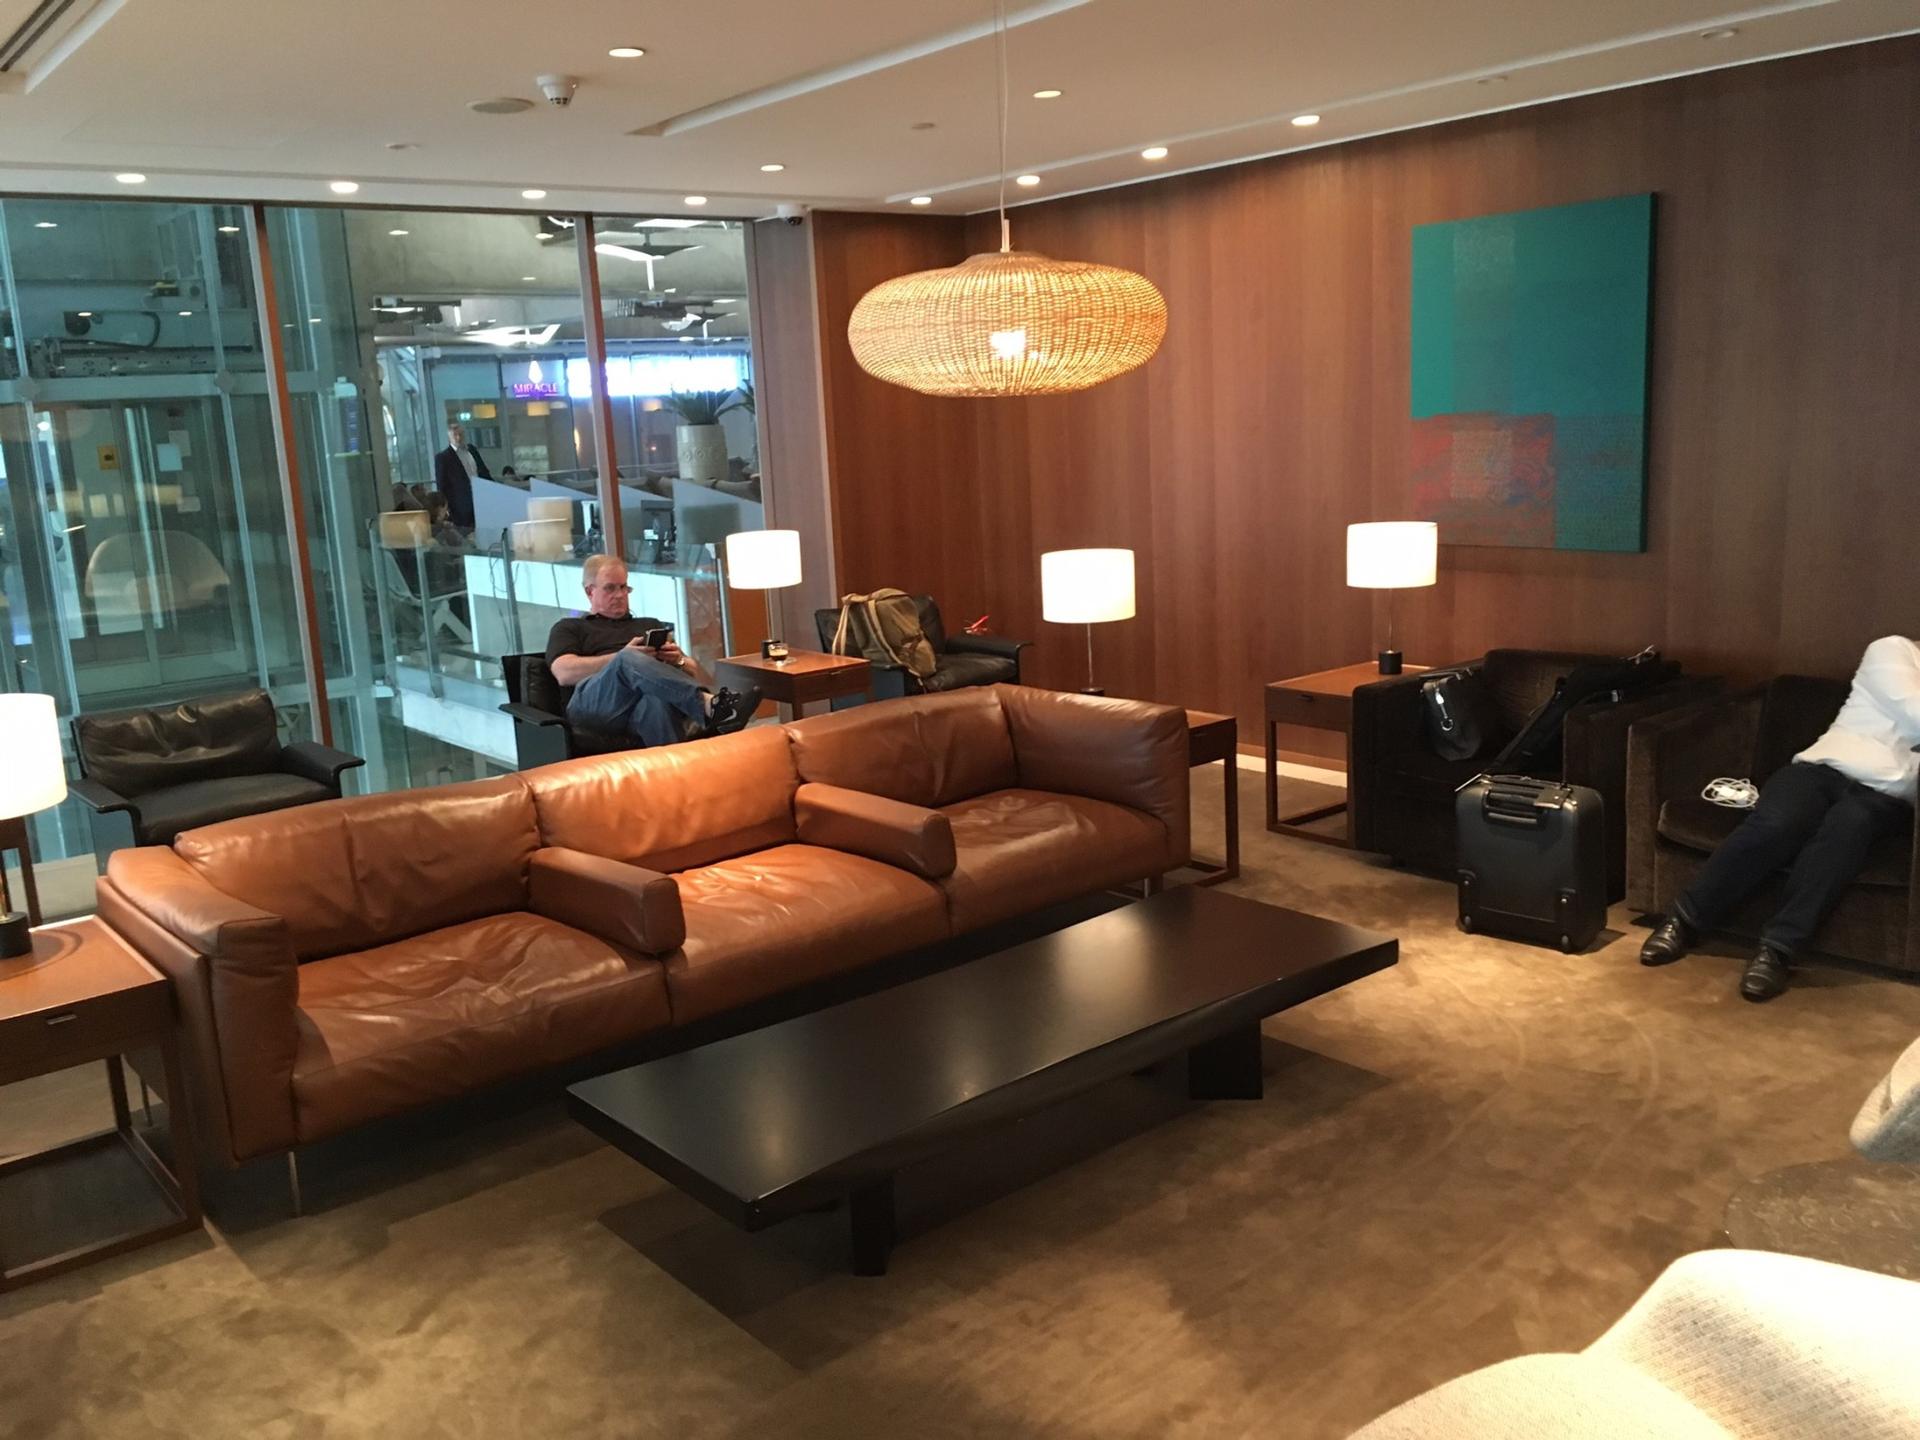 Cathay Pacific First and Business Class Lounge image 63 of 69